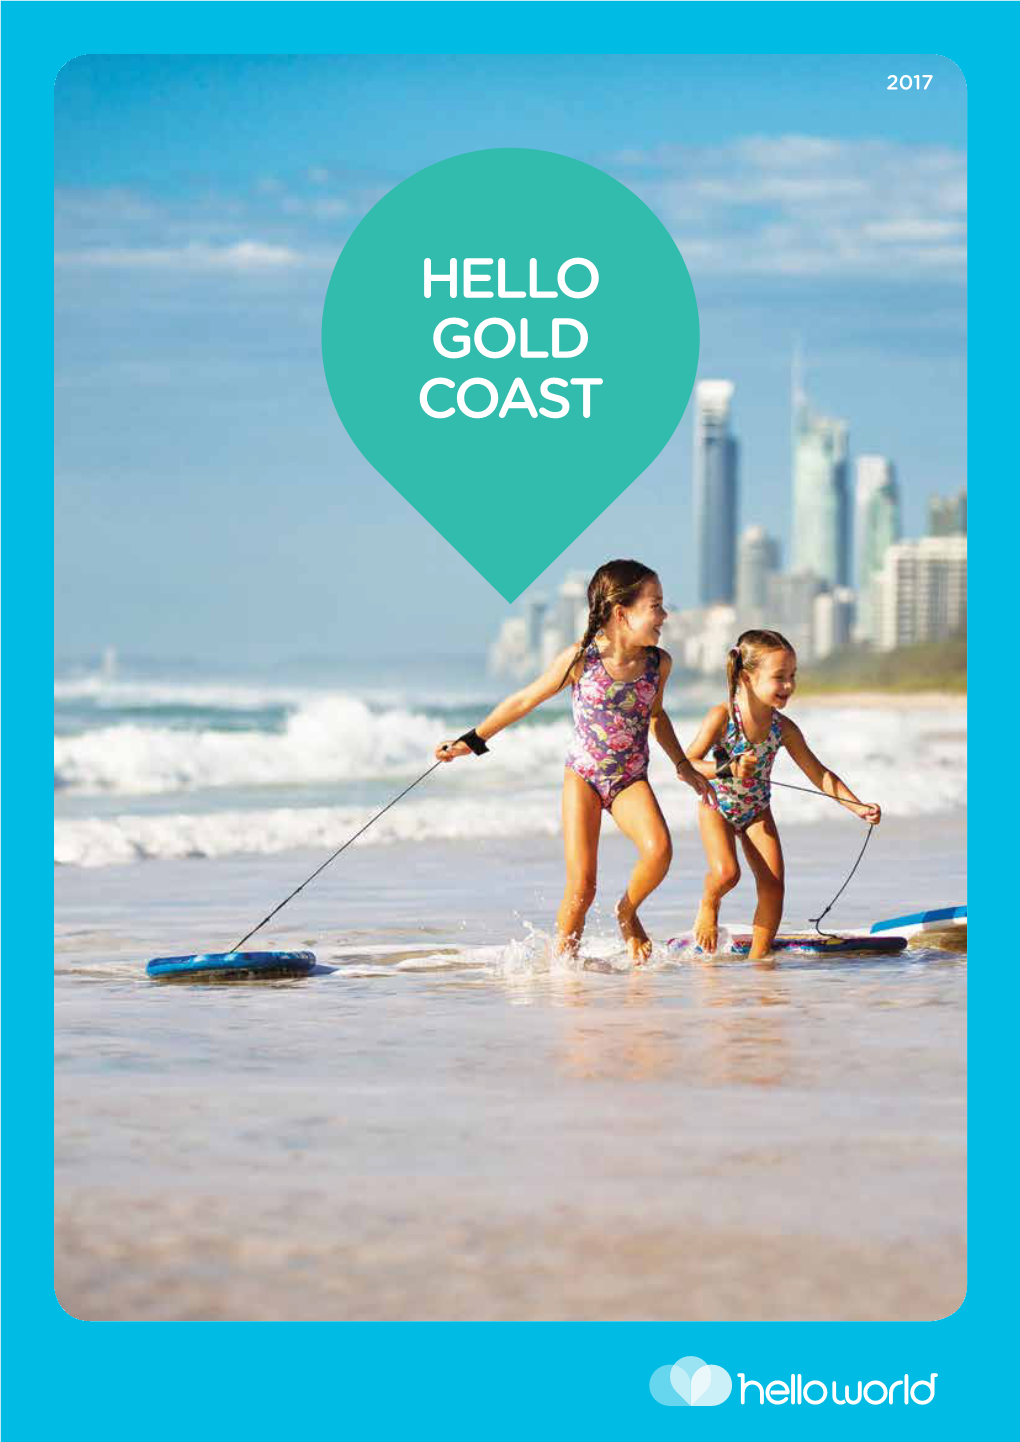 HELLO GOLD COAST Helloworld Is a Fresh New Travel Brand with a Long and Solid History